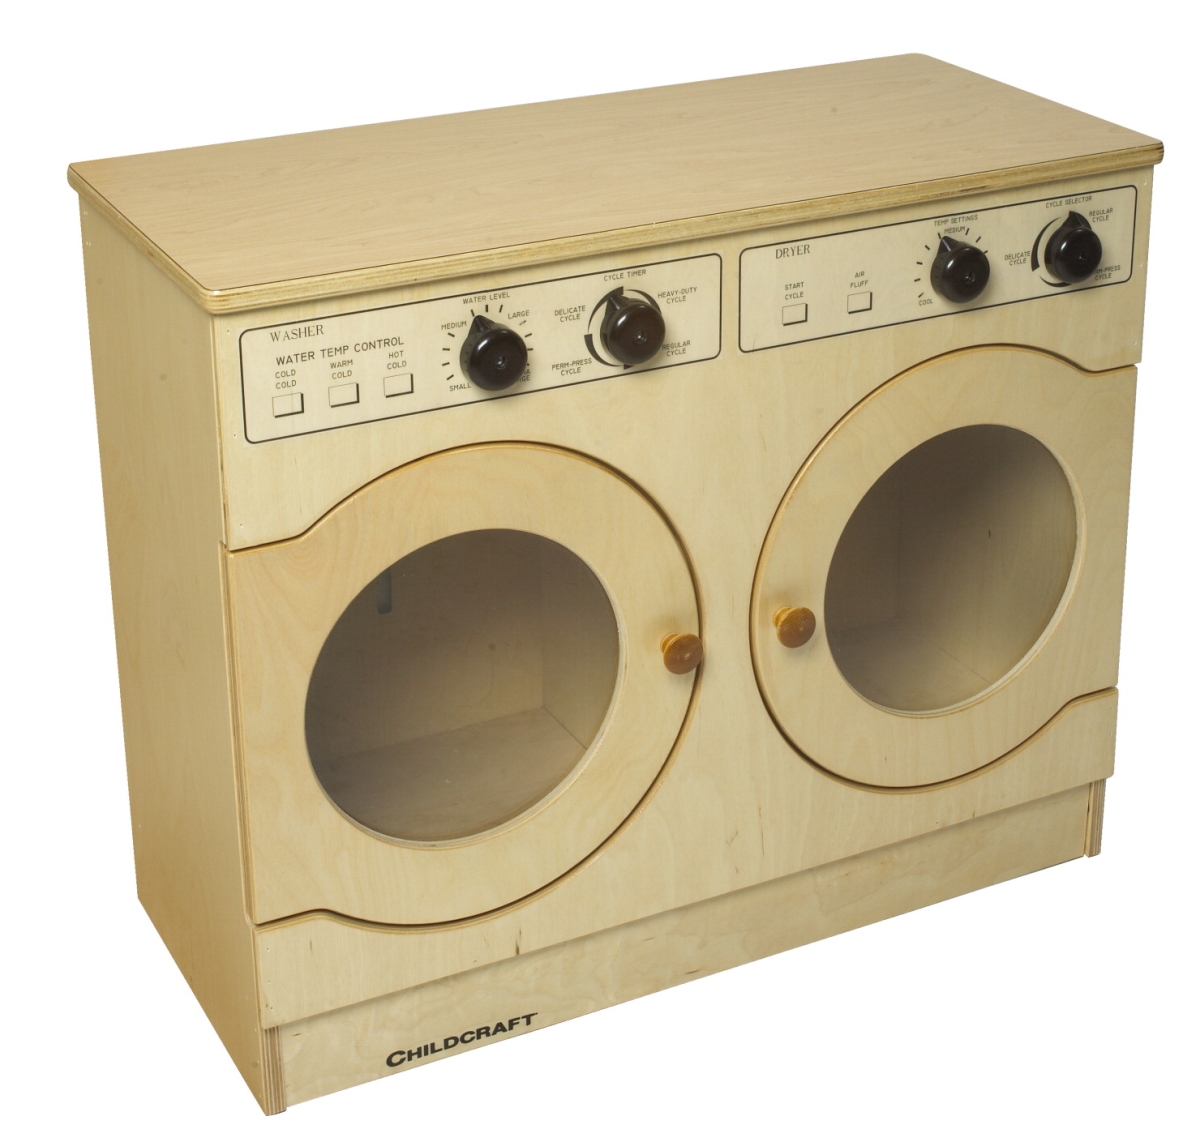 29.5 X 13.37 X 24.37 In. Modern Washer & Dryer Combo